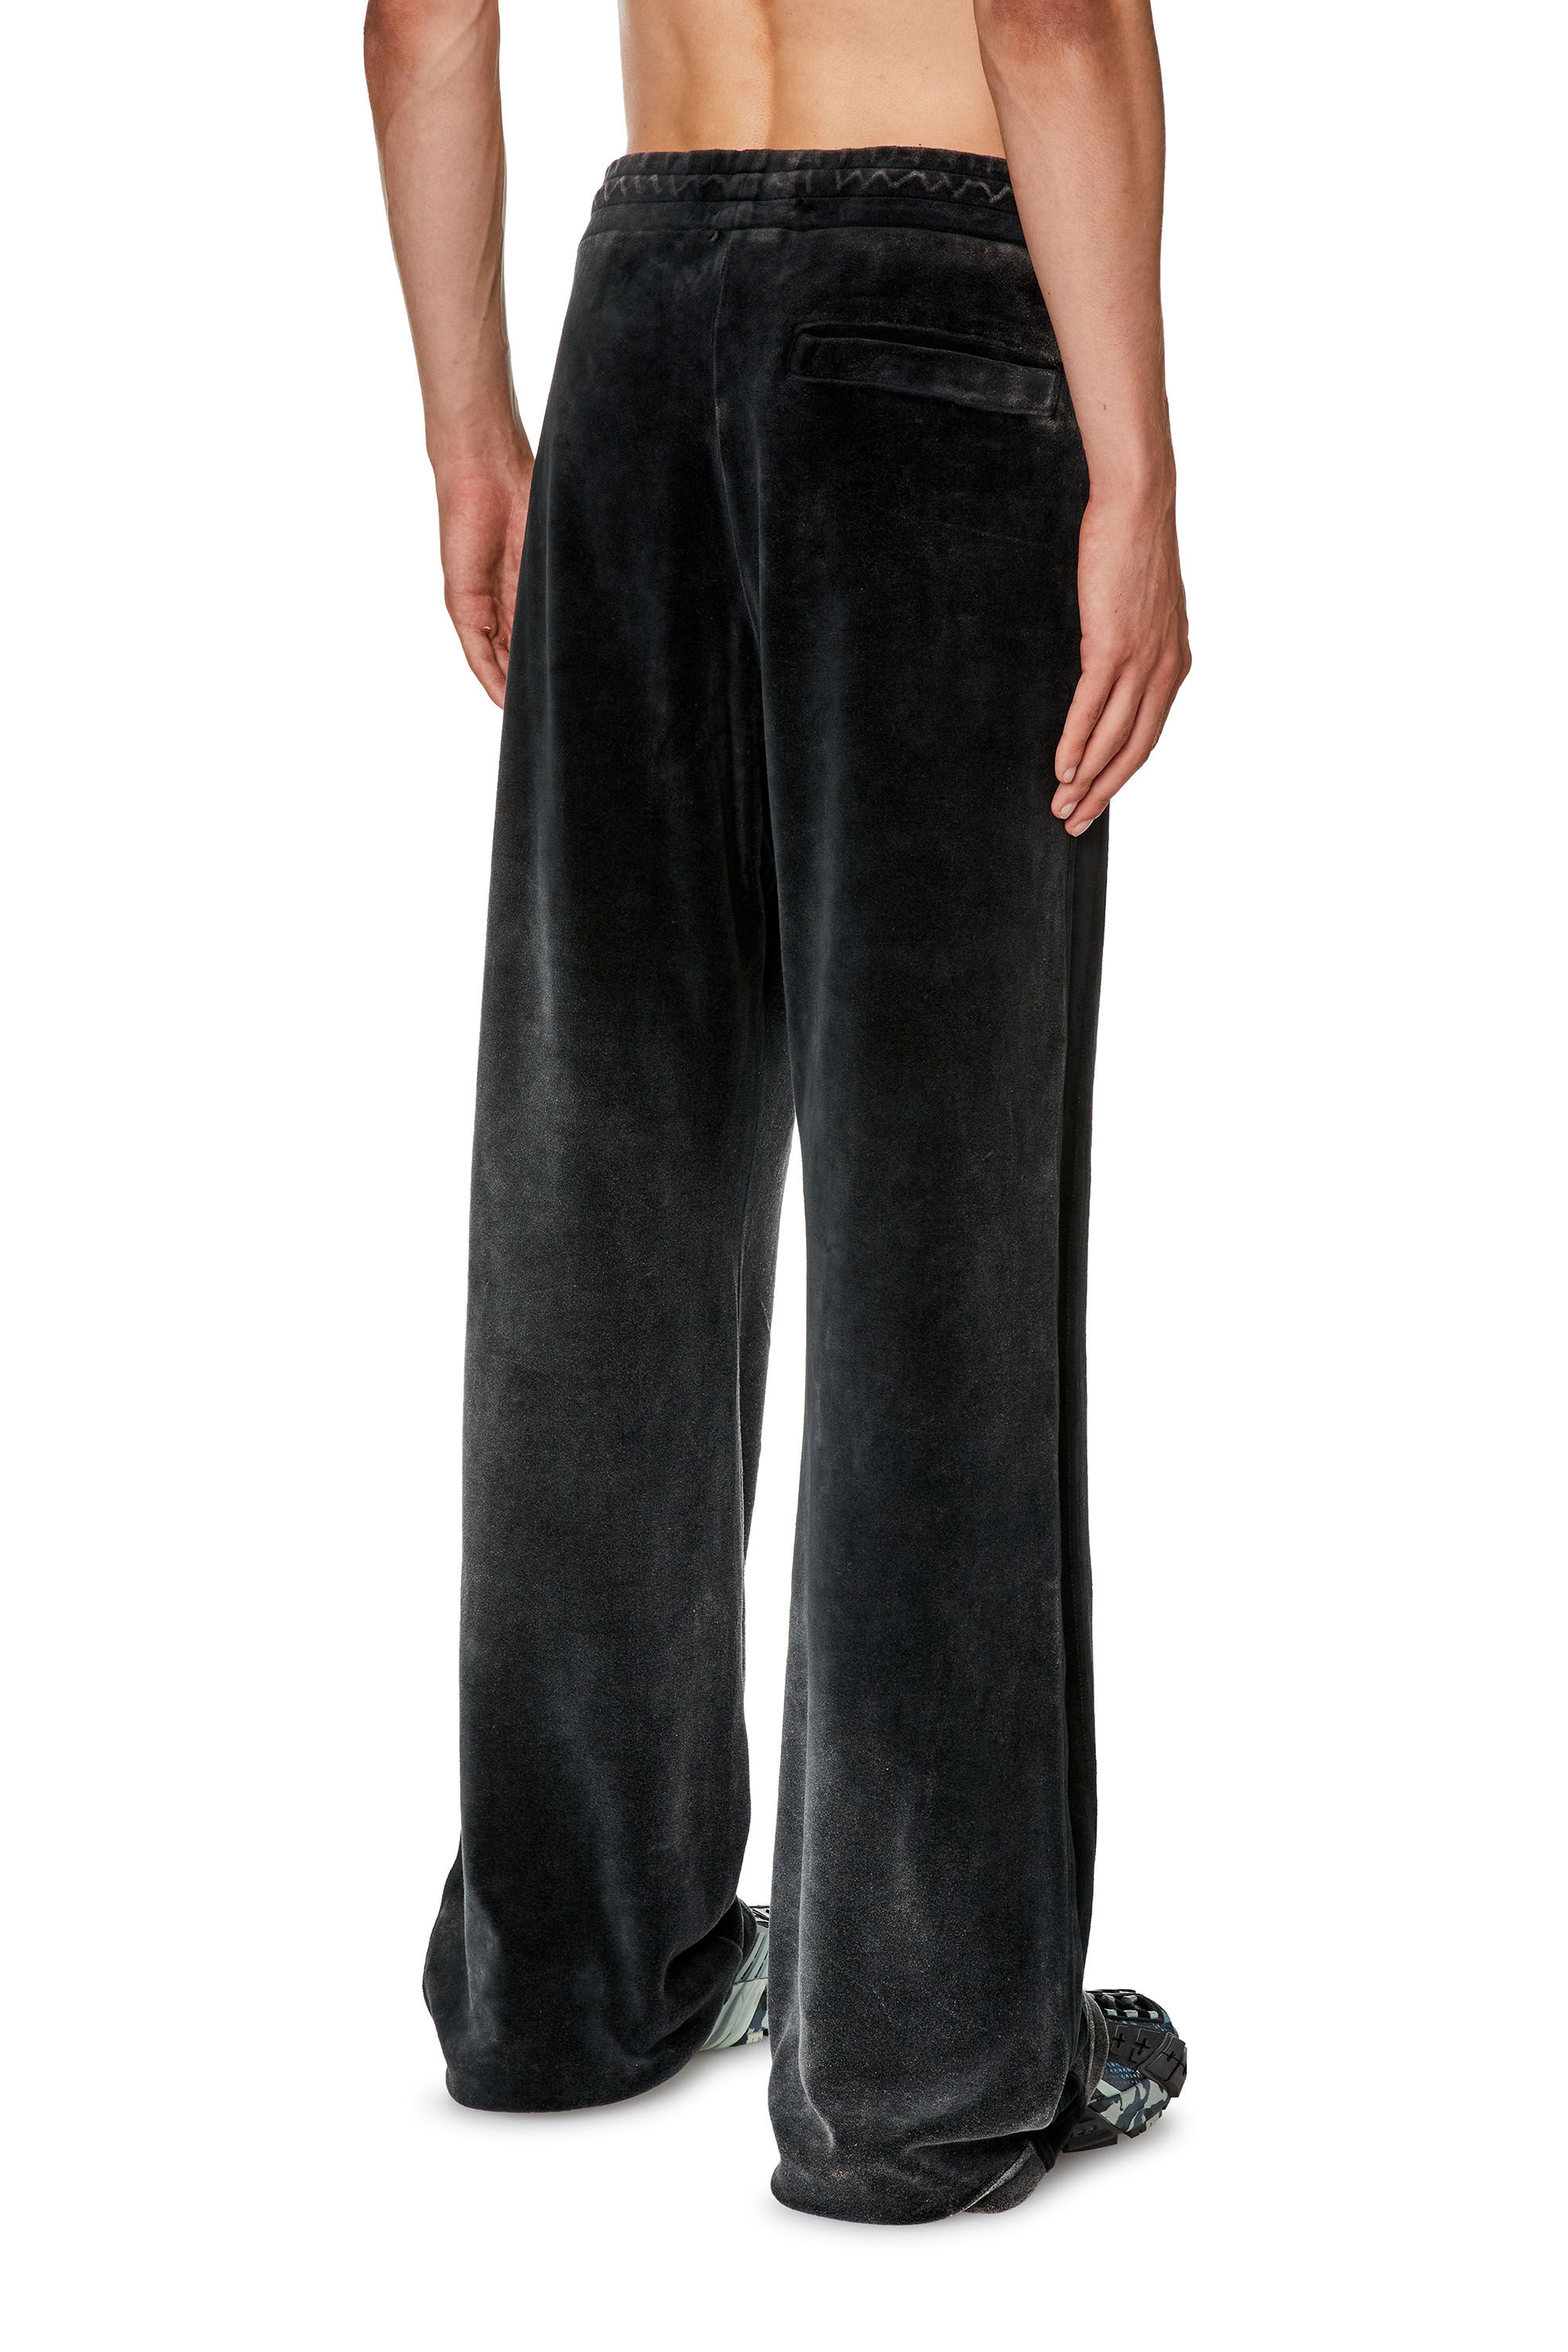 Men's Chenille track pants with side bands | Black | Diesel